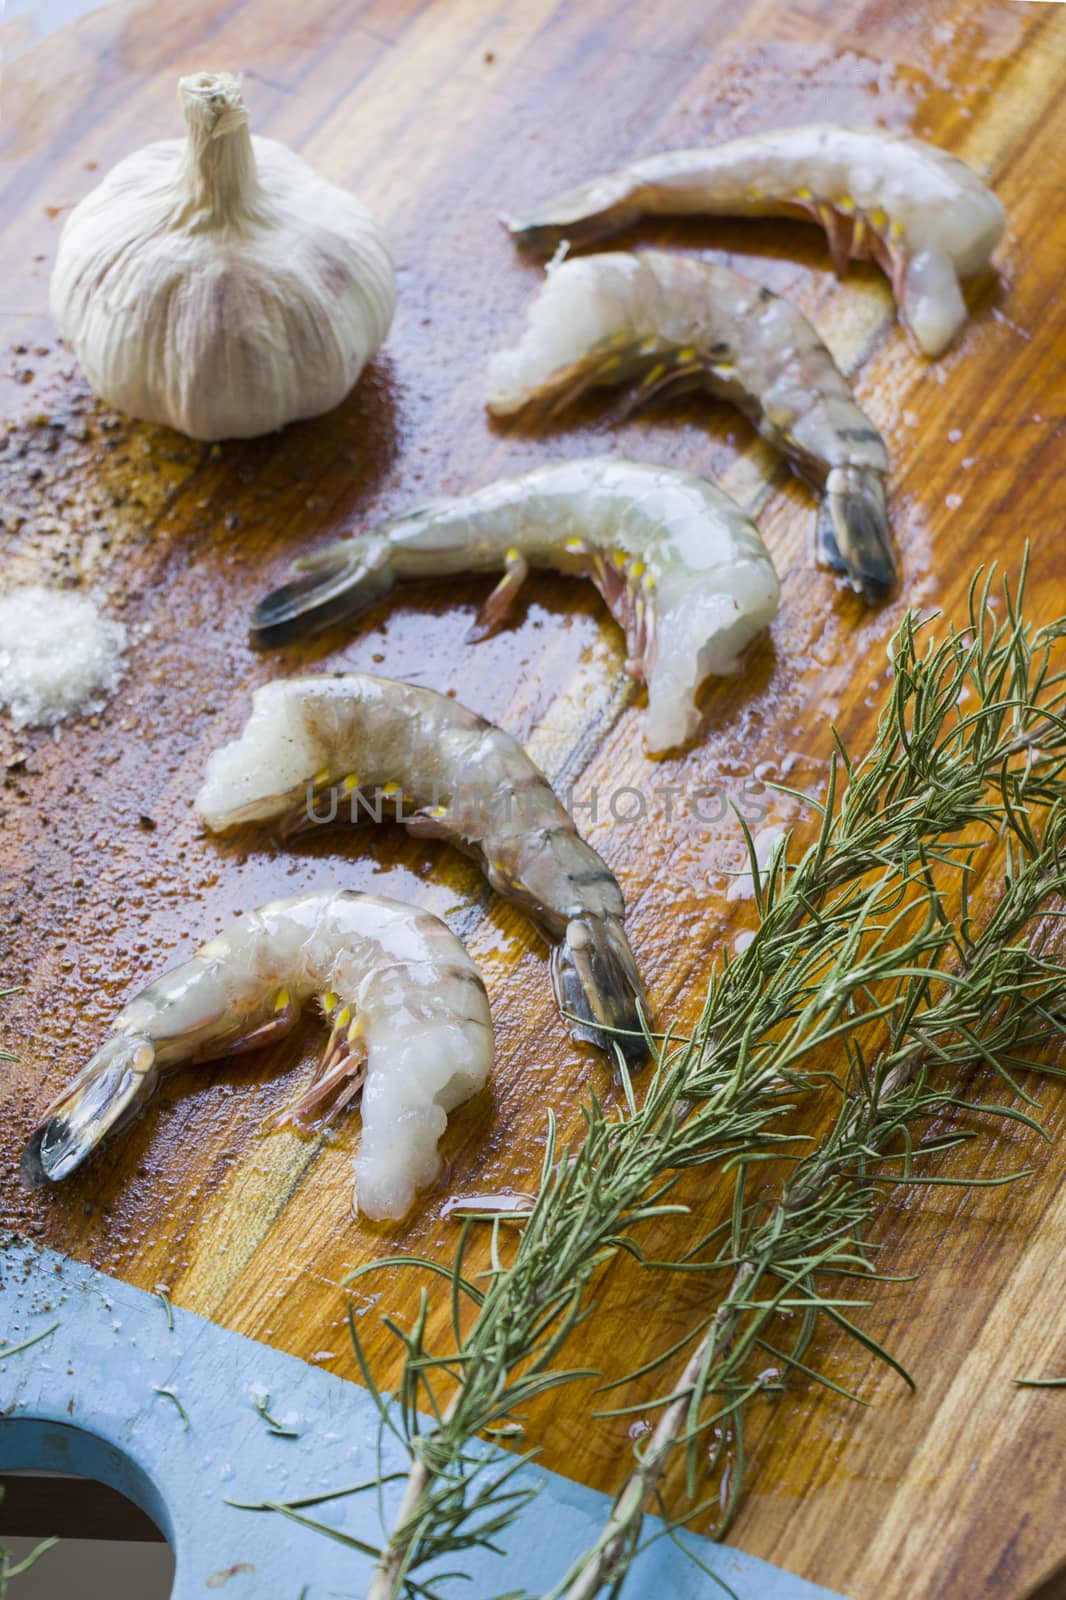 Raw shrimps on the wooden board with salt, dry pepper and rosemary by Taidundua